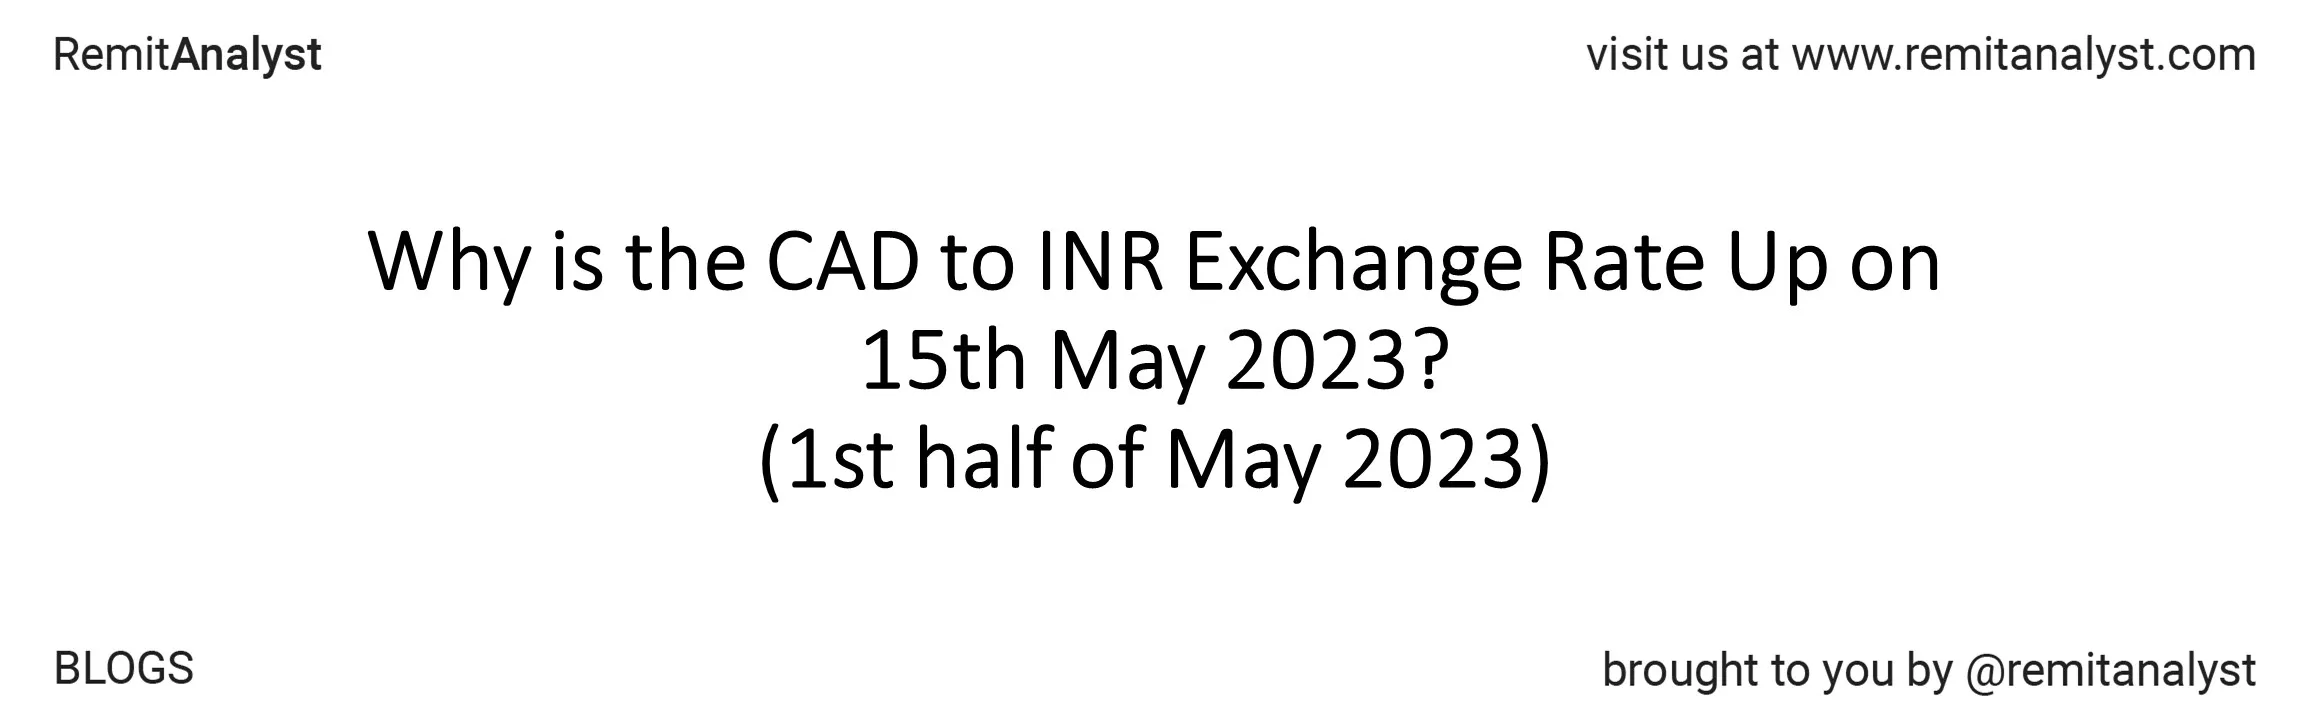 cad-to-inr-exchange-rate-from-1-may-2023-to-15-may-2023-title